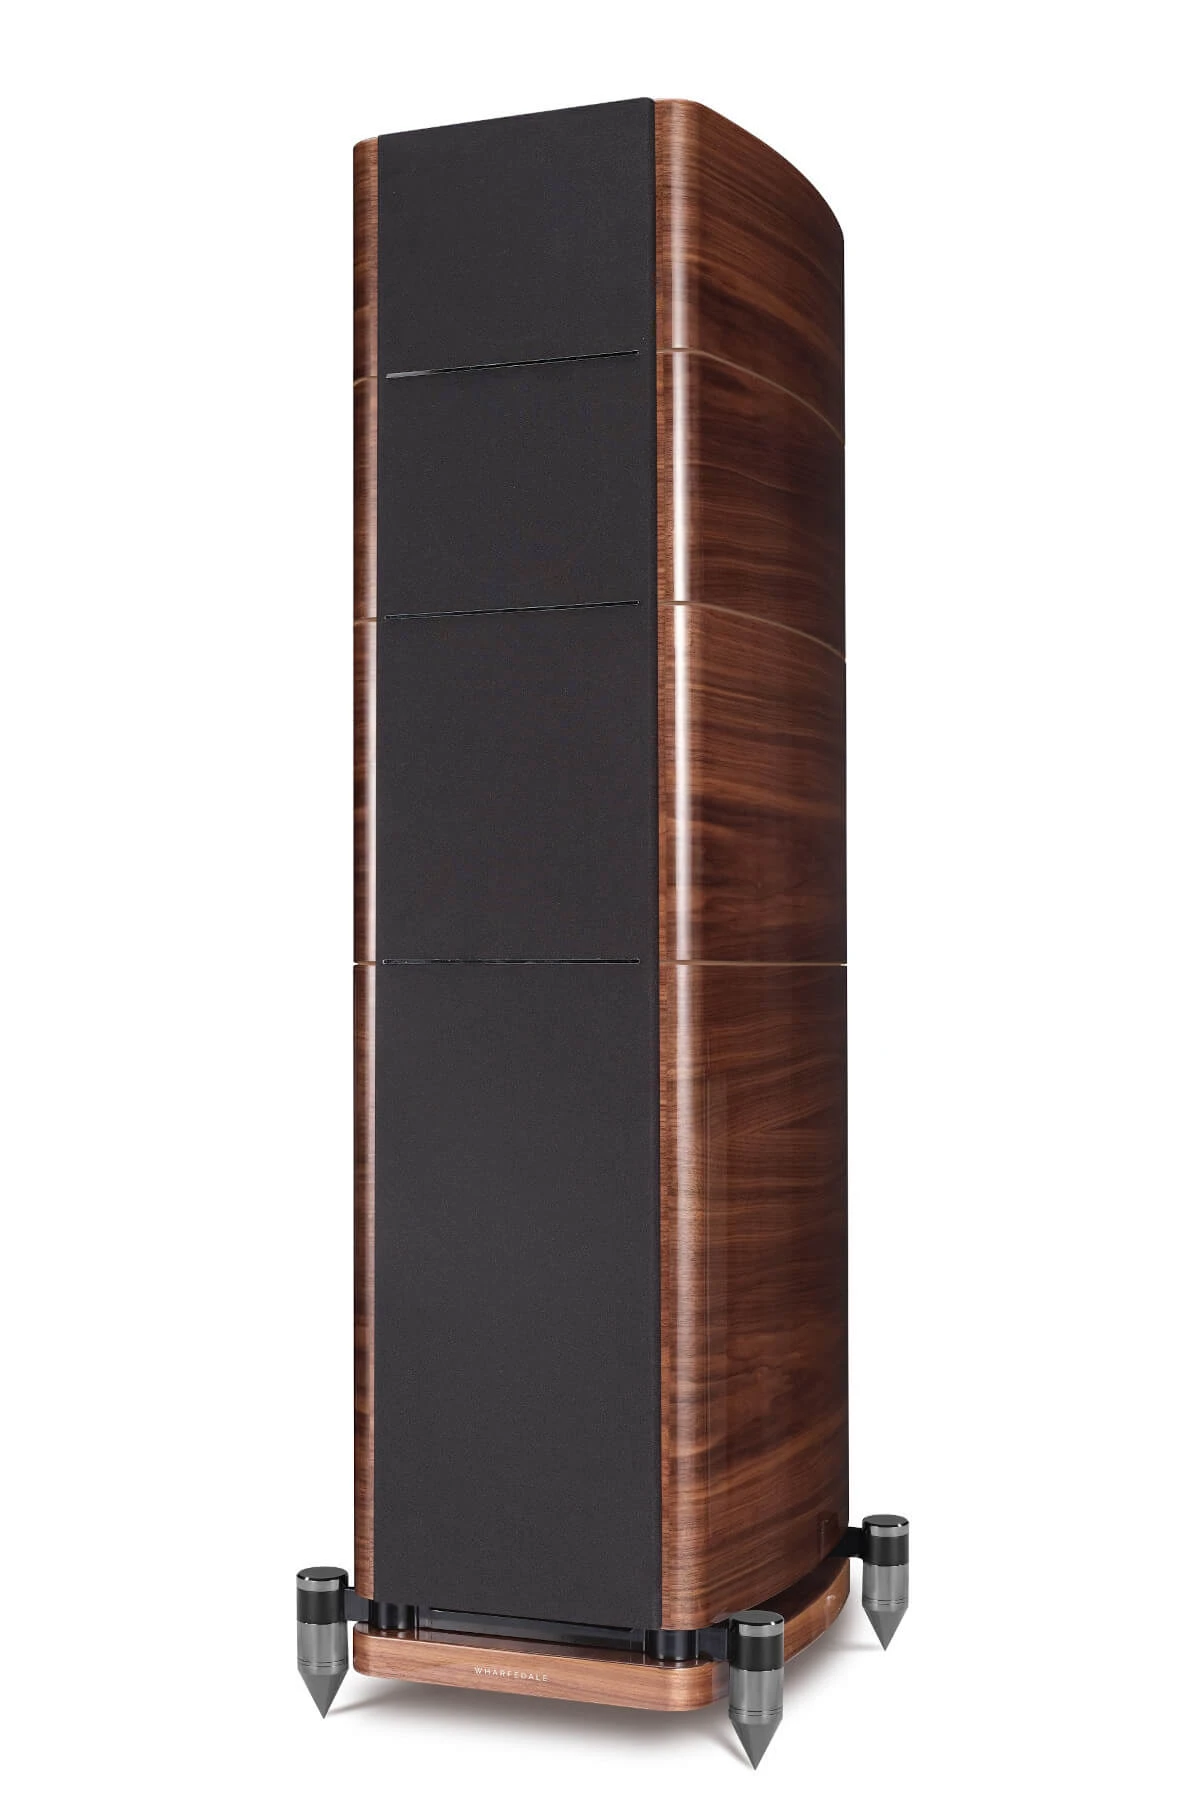 Wharfedale-Elysian-4-front-walnut-with-cover